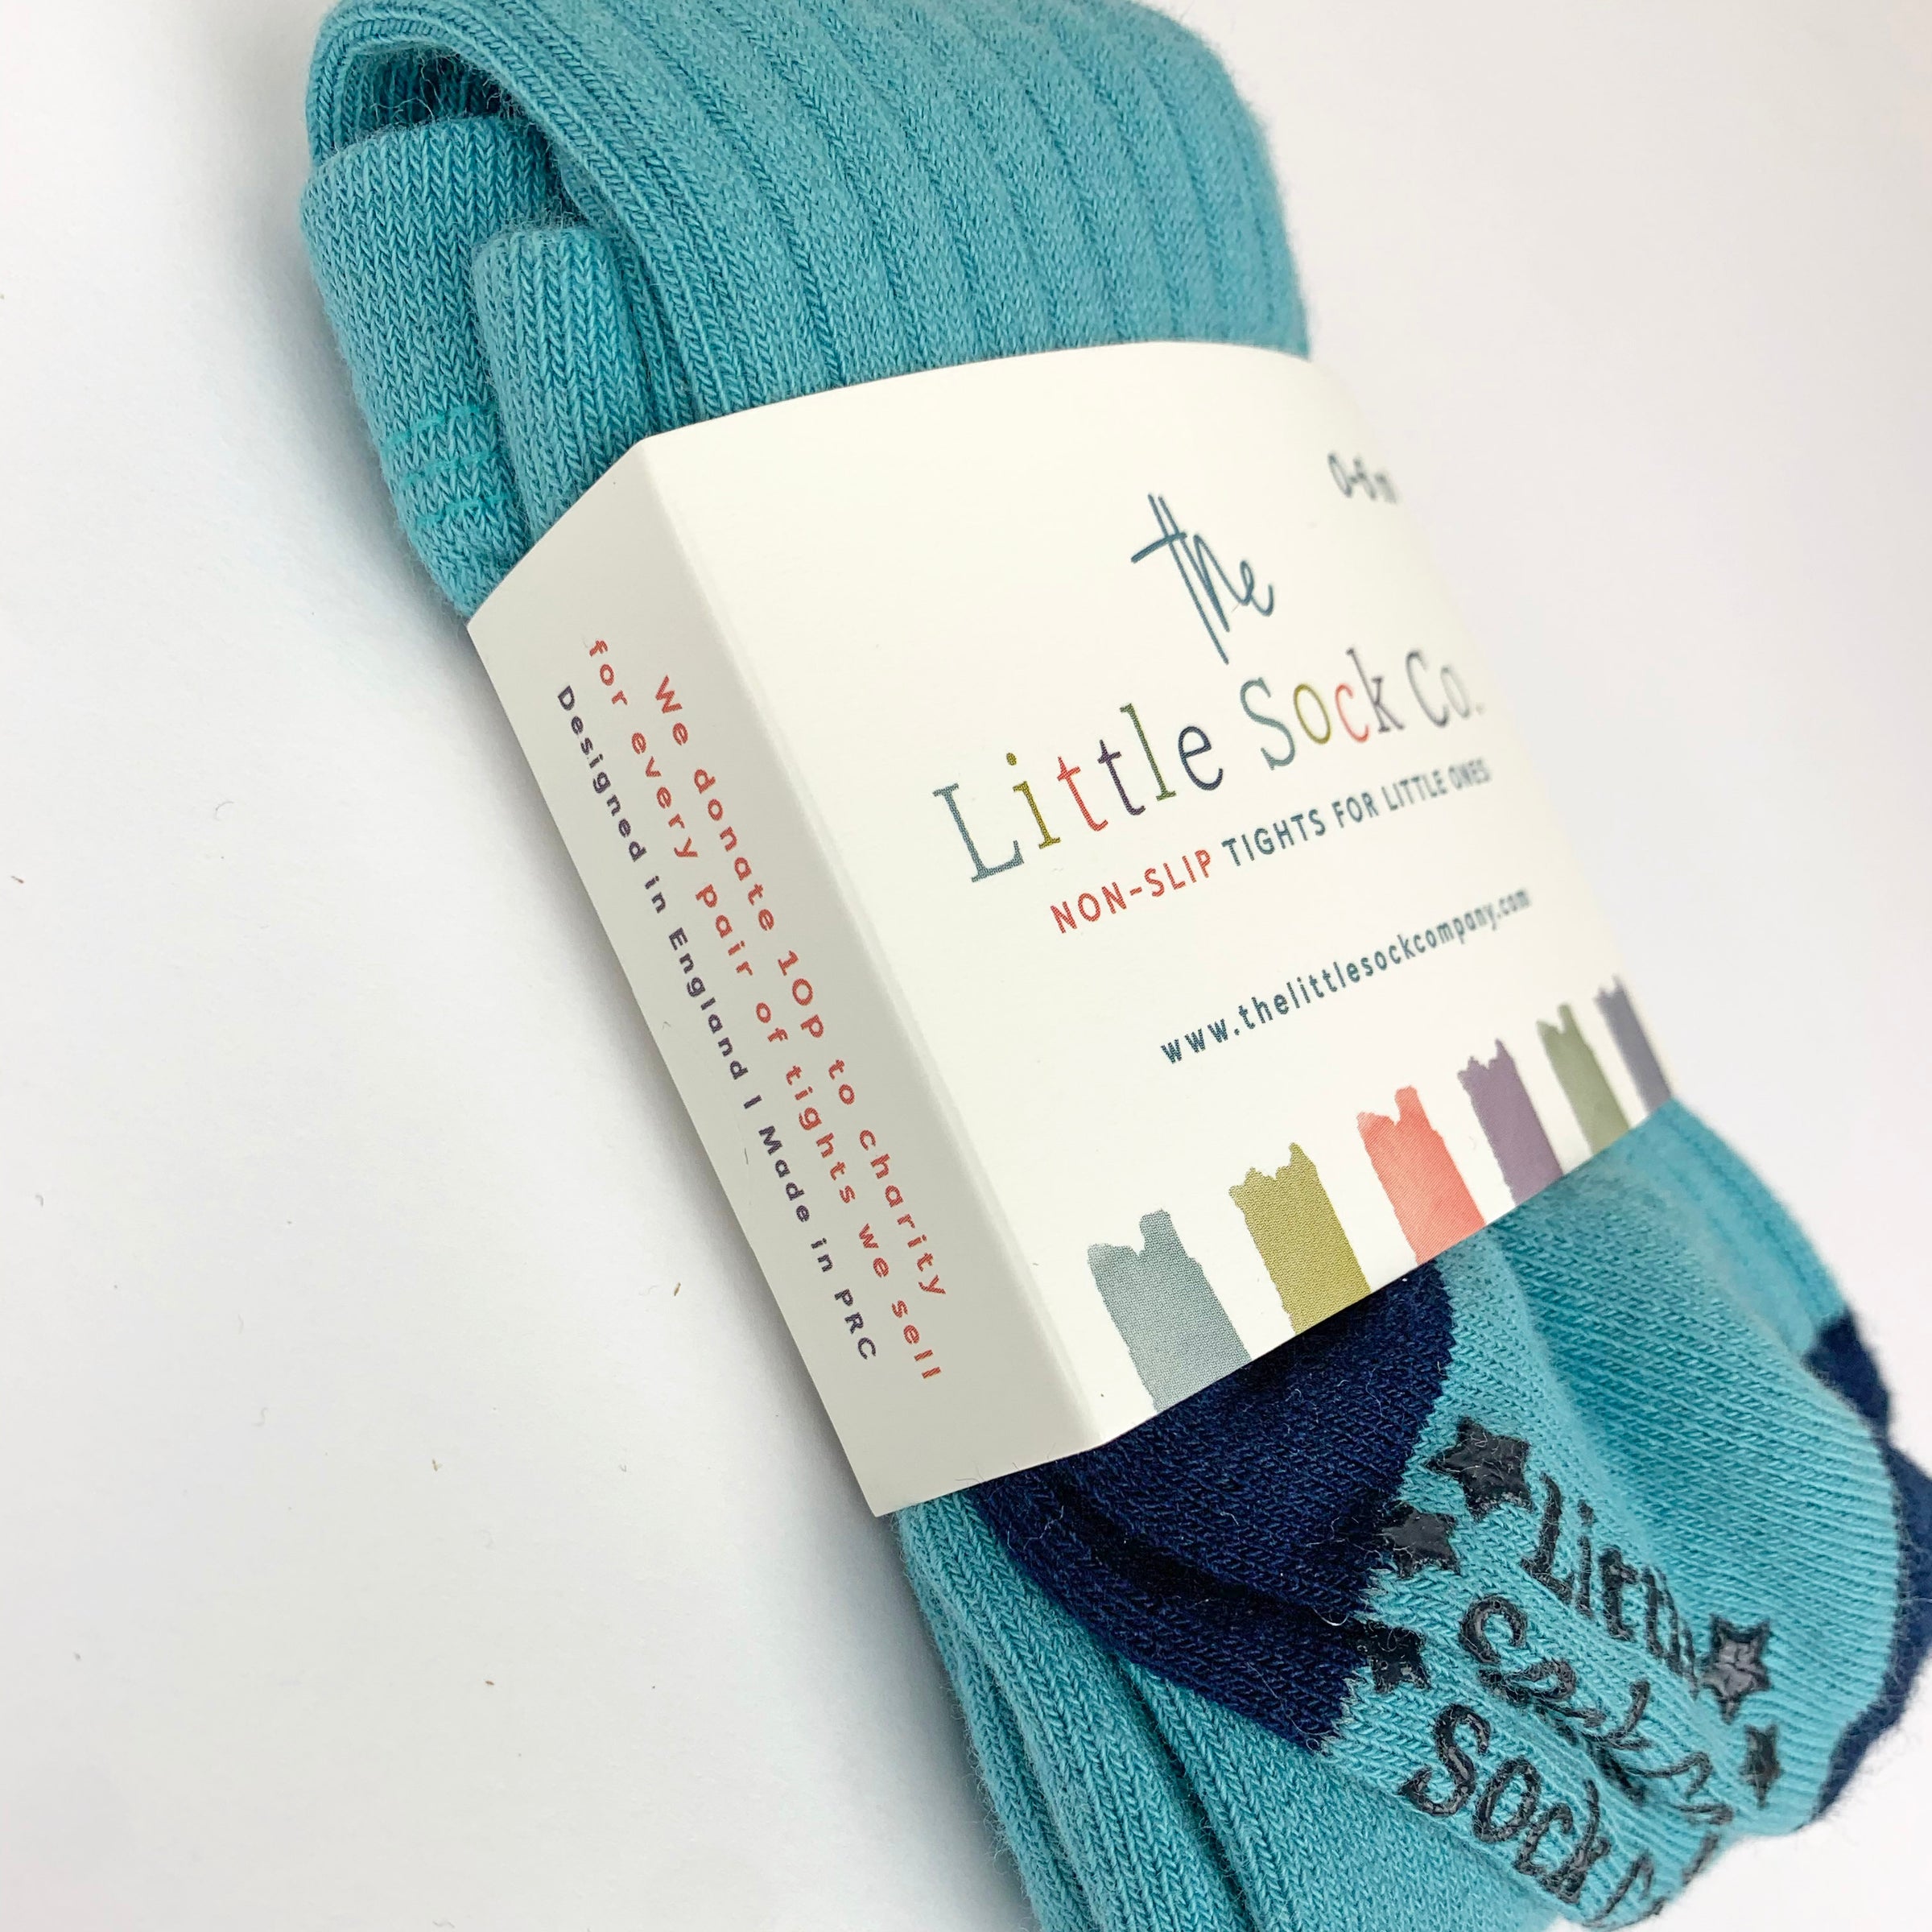 Non-Slip Super Soft Ribbed Baby and Toddler Tights in Aqua - 0-2 Years –  The Little Sock Company